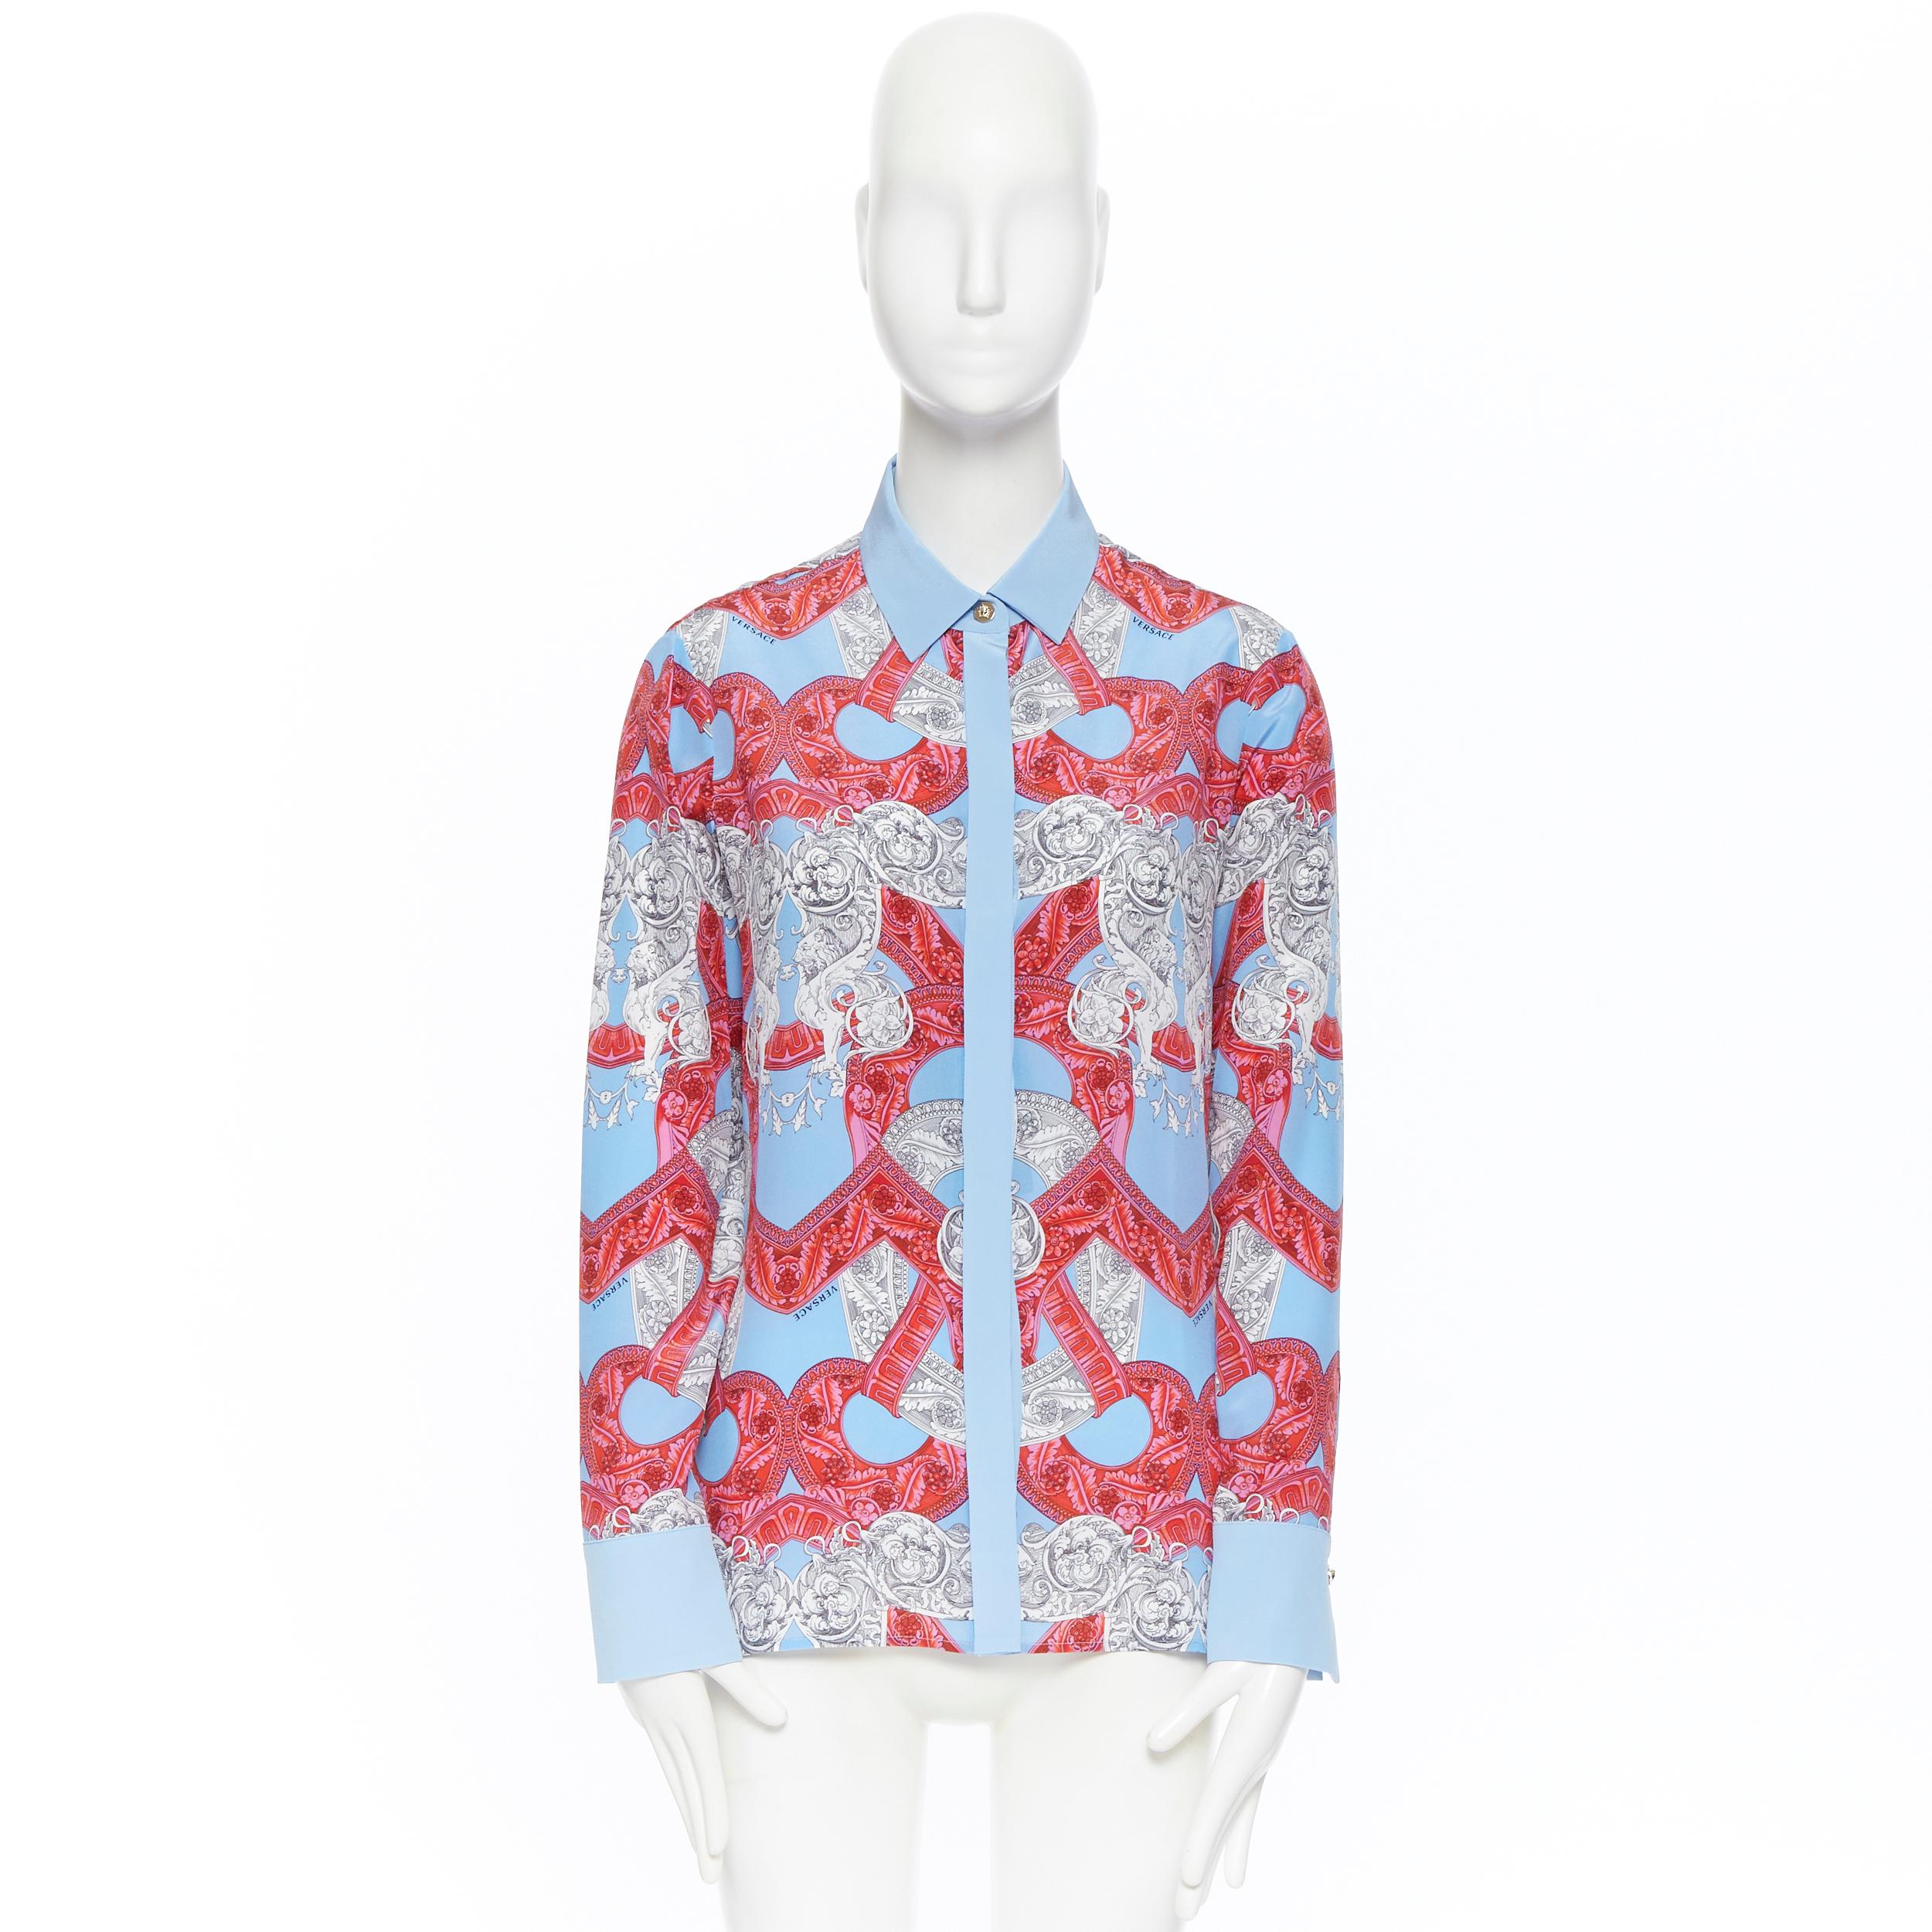 new VERSACE 2018 Runway silk blue pink baroque barocco print Medusa shirt IT38 S
Brand: Versace
Designer: Donatella Versace
Collection: Resort 2018 Look 10, 12
Model Name / Style: Silk shirt
Material: Silk
Color: Multicolour
Pattern: Other;